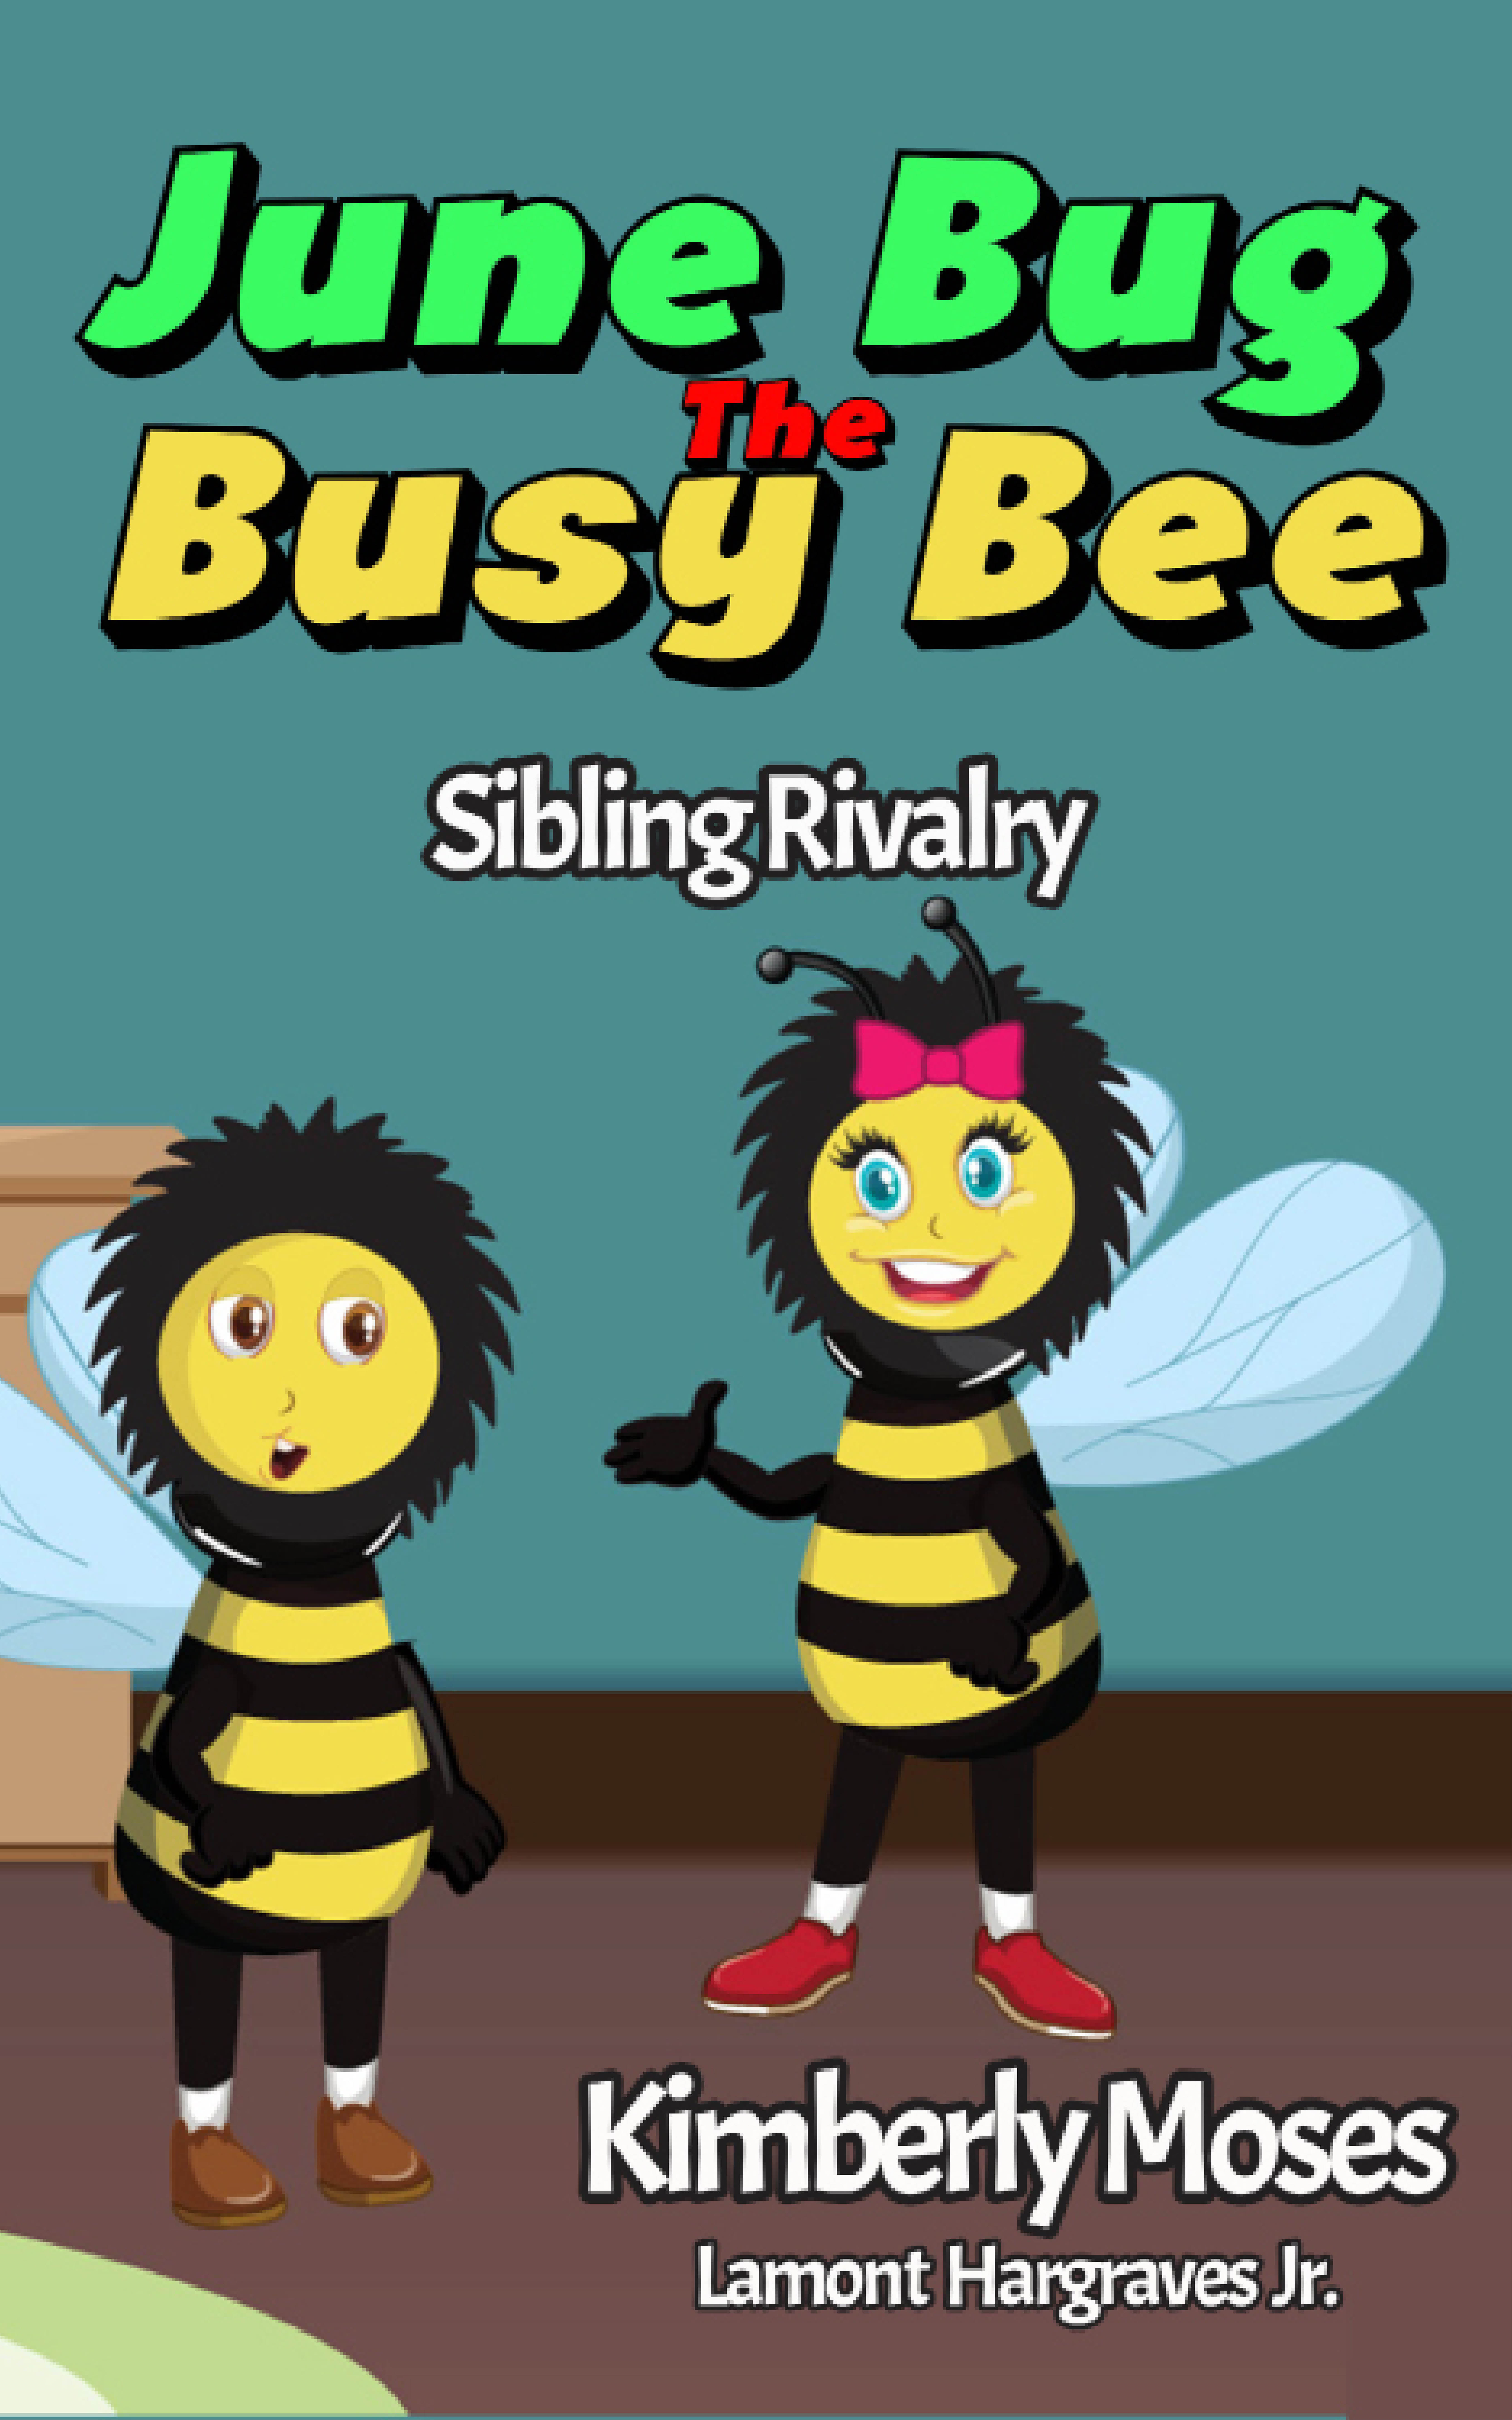 June Bug The Busy Bee: Sibling Rivalry